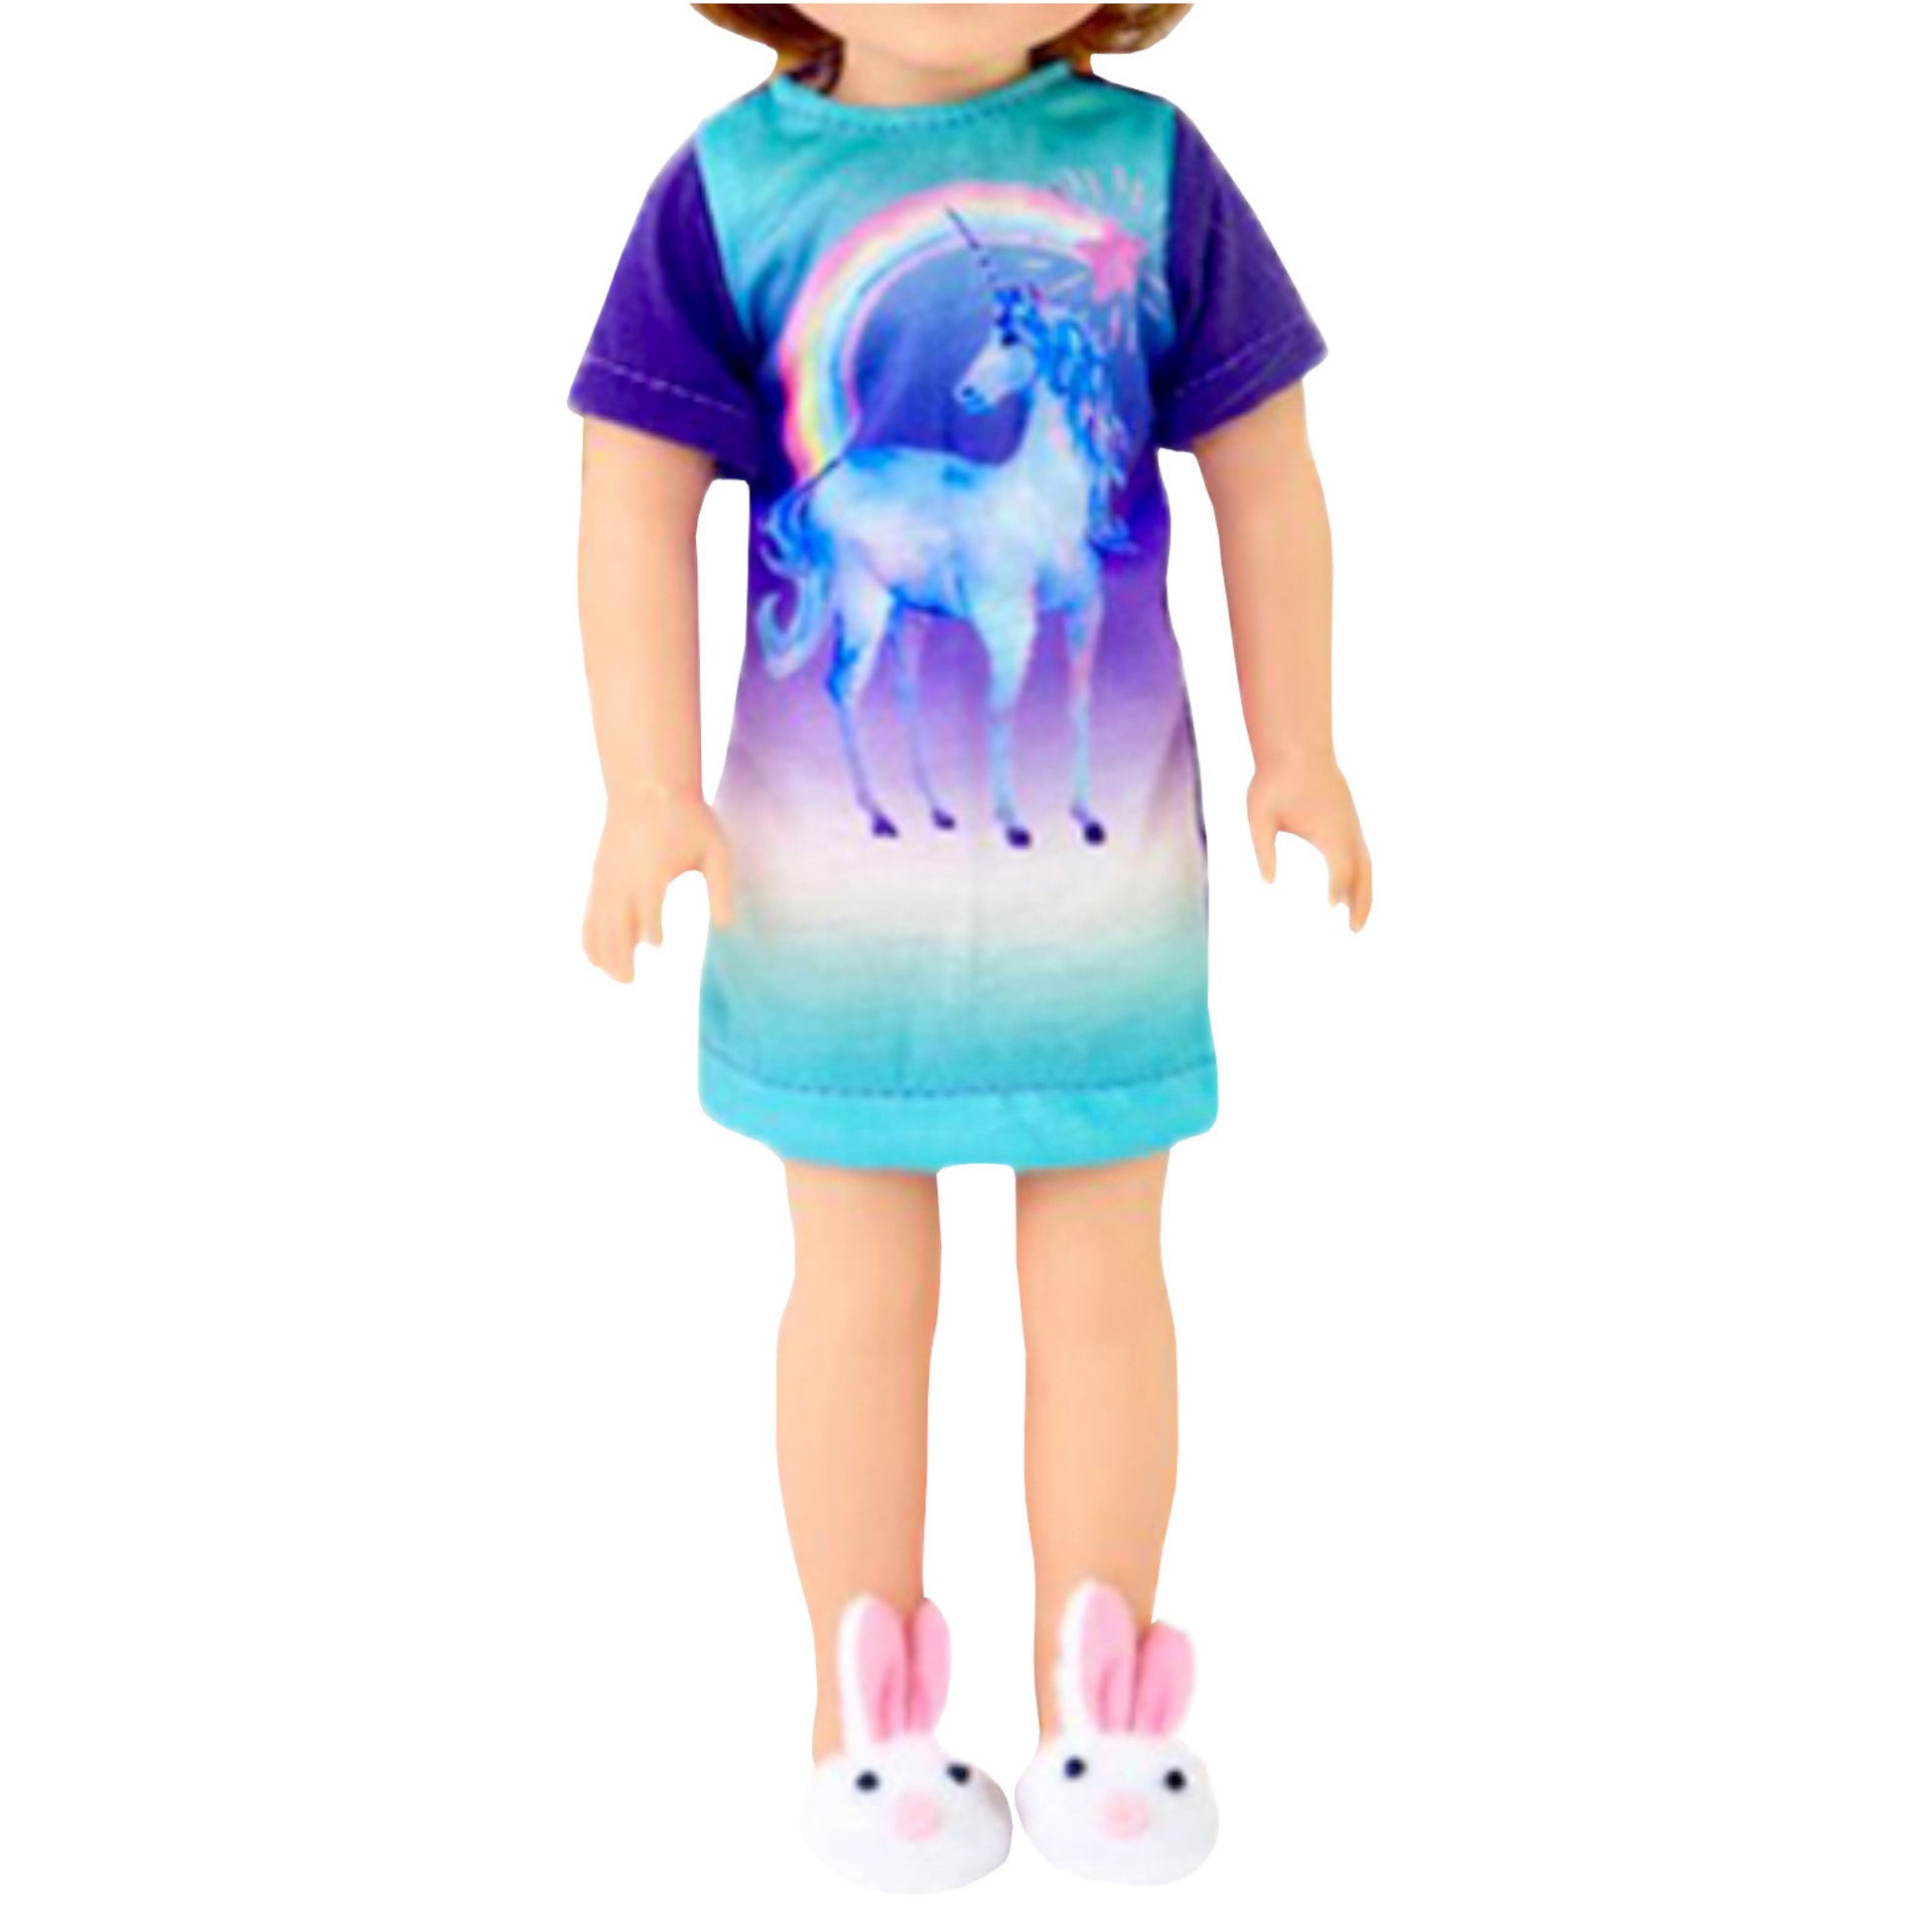 Majestic Unicorn Nightgown for 14 1/2-inch dolls with doll